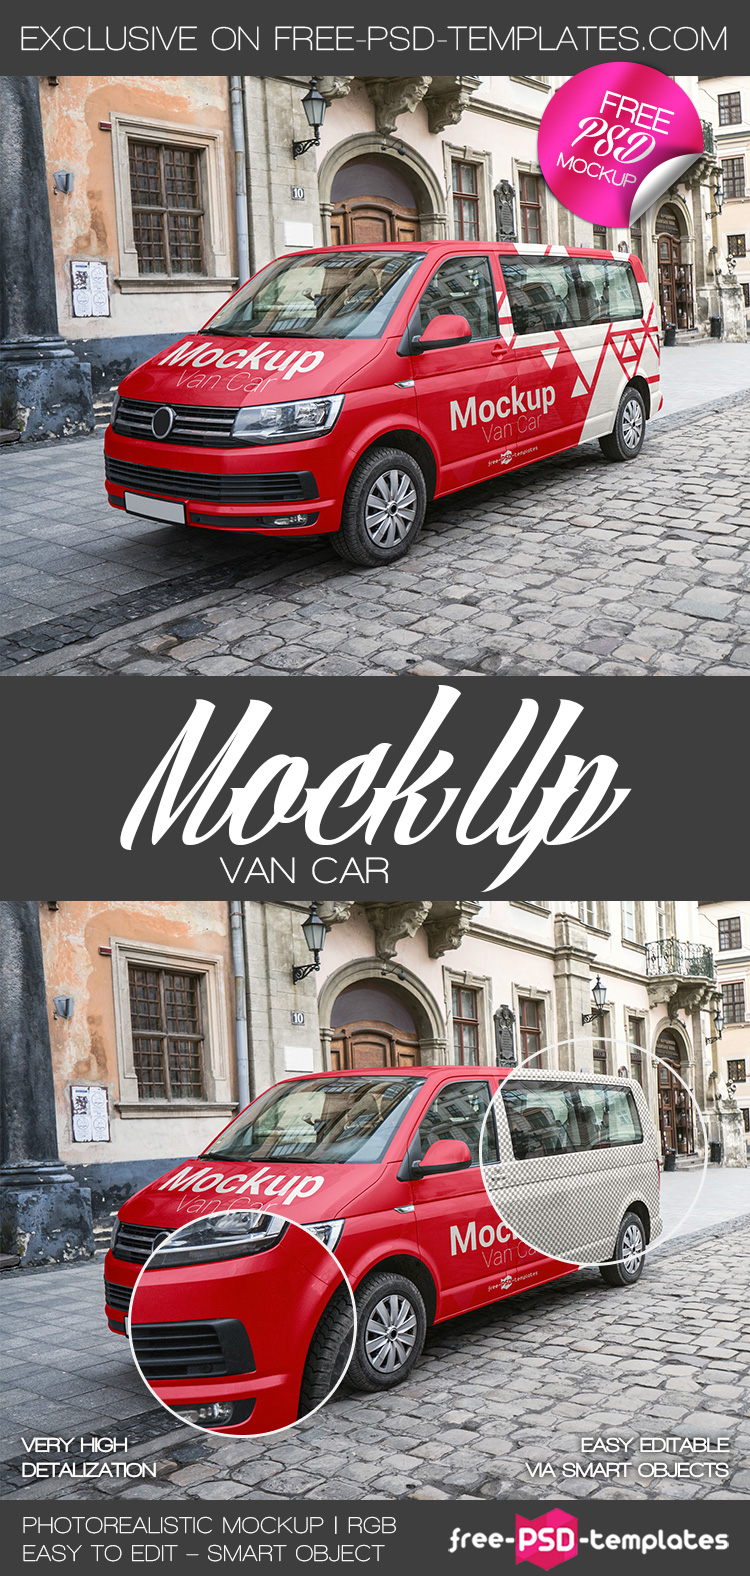 Download Free Van Car Mock-up in PSD | Free PSD Templates